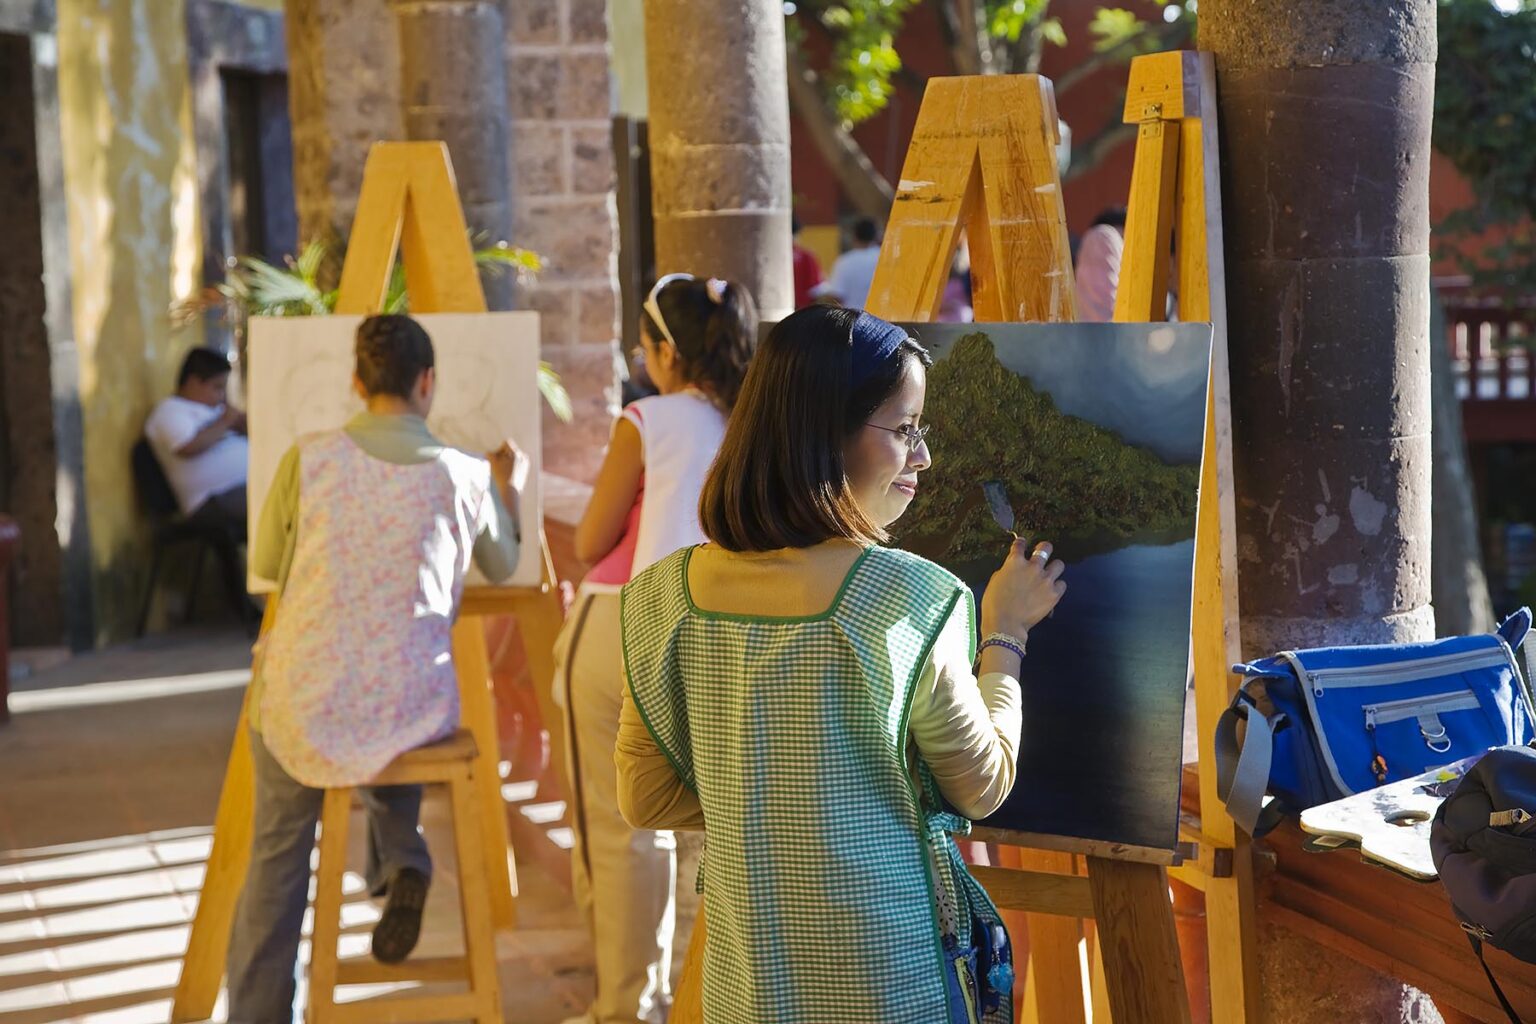 Local Mexicans take PAINTING LESSONS at a cultural center - SAN MIGUEL DE ALLENDE, MEXICO